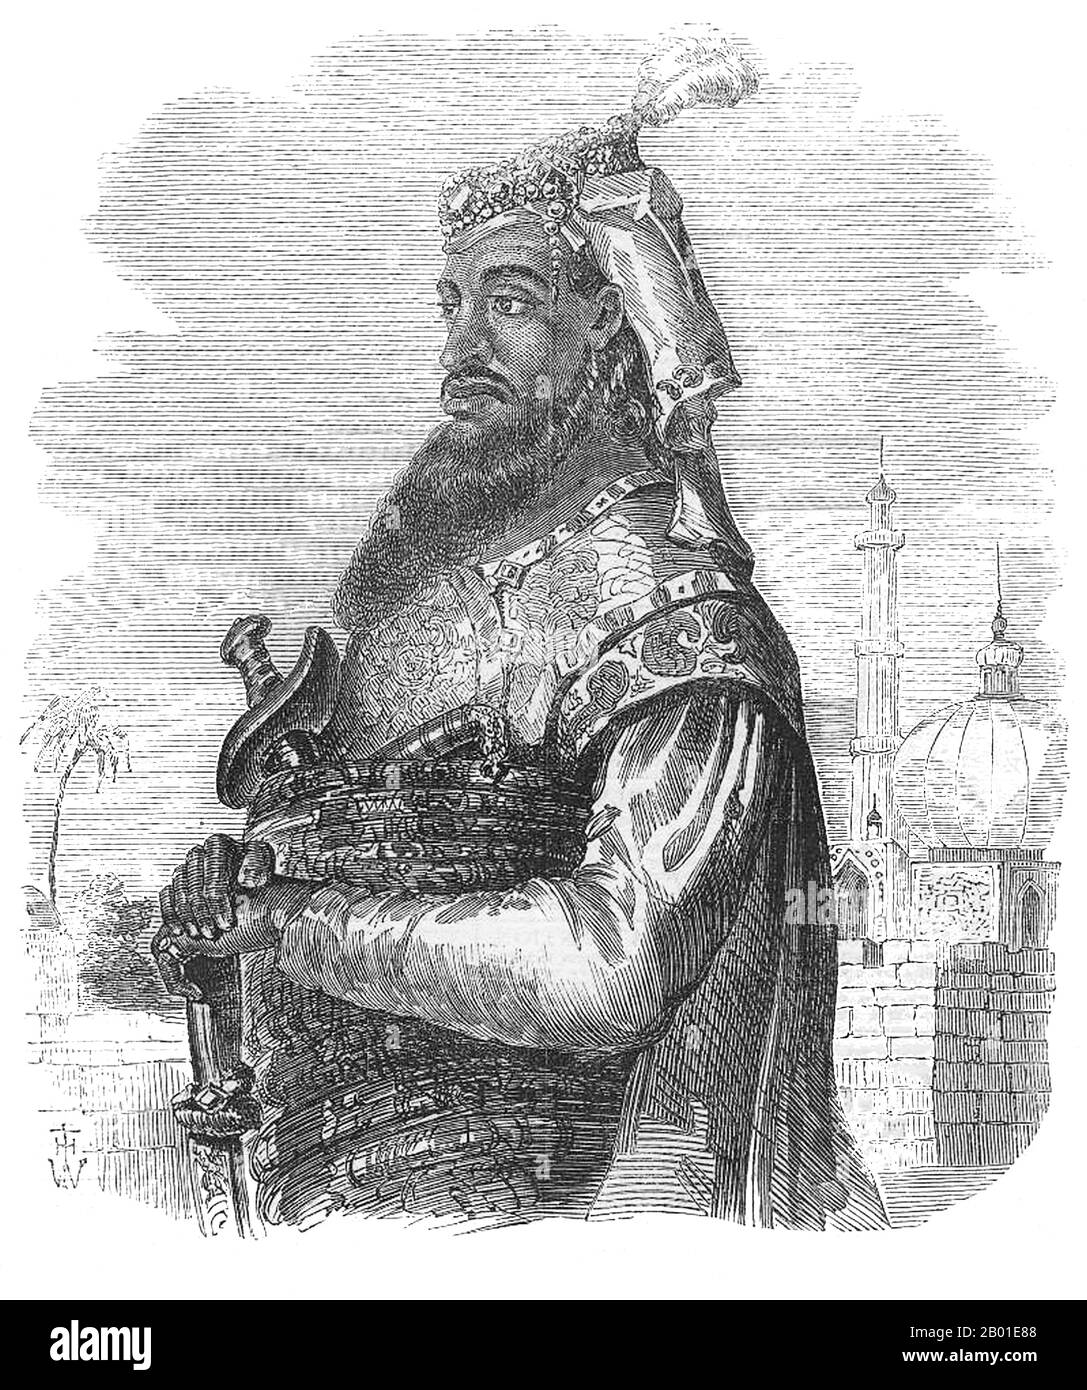 India: Nana Sahib, independence fighter and hero of the anti-British 'Indian Mutiny' or Indian Rebellion of 1857. Engraving from the Illustrated London News, 1857.  Nana Saheb Peshwa II (19 May 1824 - c. 24 September 1859), born as Dhondu Pant, was an Indian leader during the anti-British rising of 1857. As the adopted son of the exiled Maratha Peshwa Baji Rao II, he sought to restore the Maratha confederacy and the Peshwa tradition.  After the defeat of the uprising, Nana Sahib disappeared to Naimisha Forest in Nepal and his ultimate fate is not known. Stock Photo